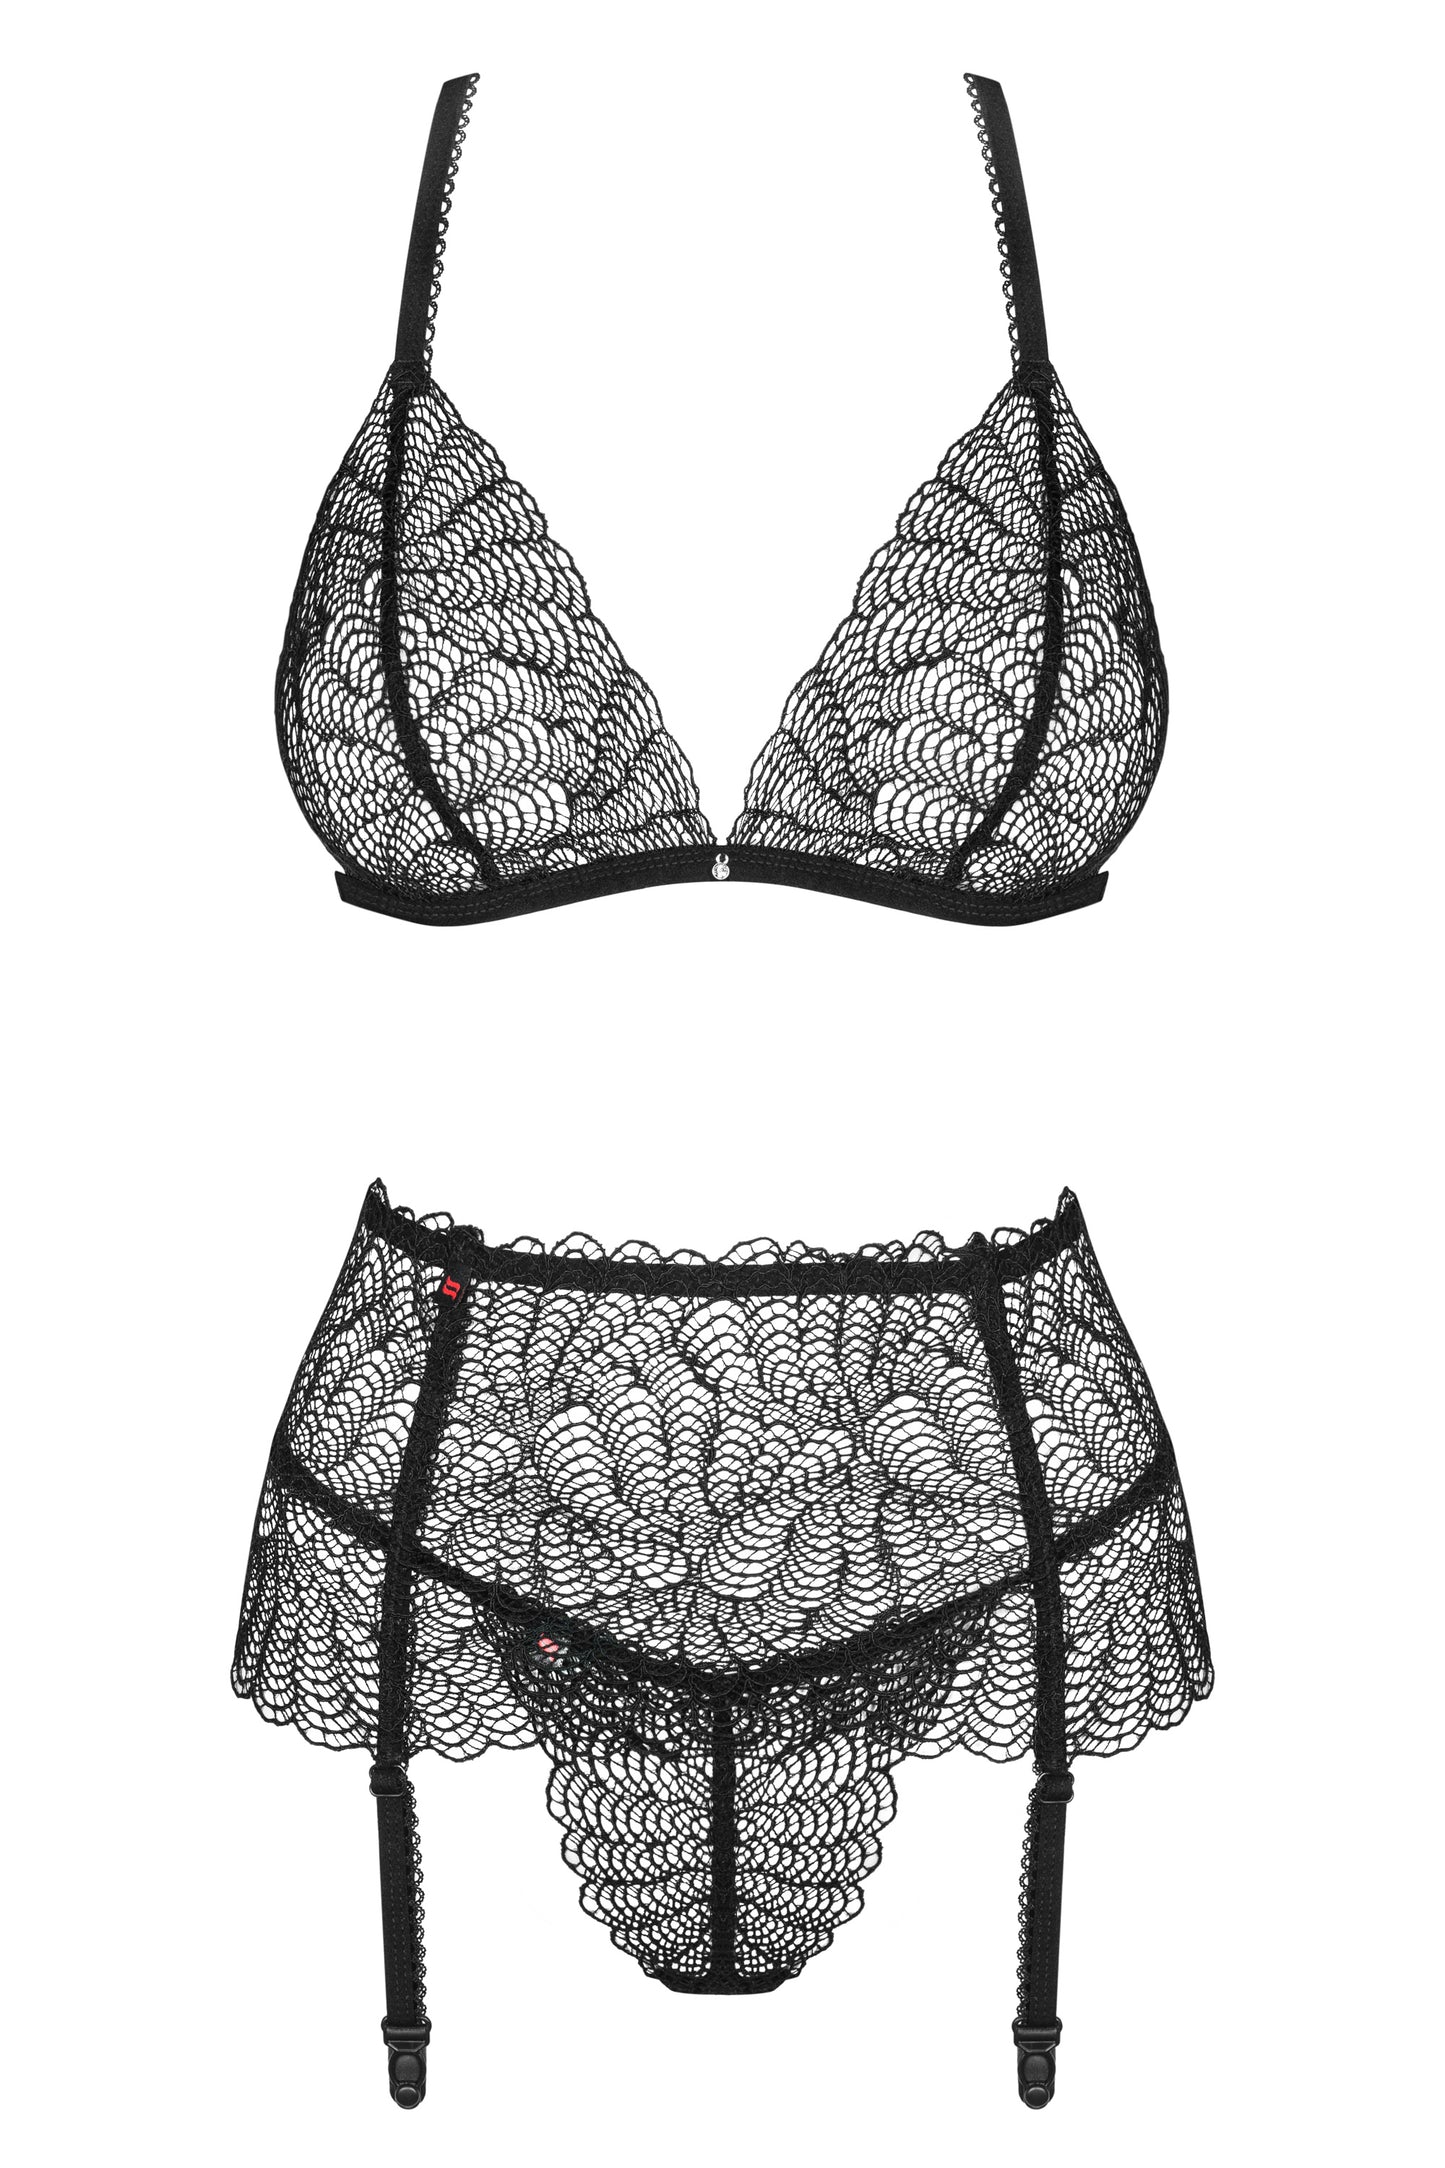 Chiccanta Elegant lingerie set consisting of a lace bra, garter belt and a matching thong